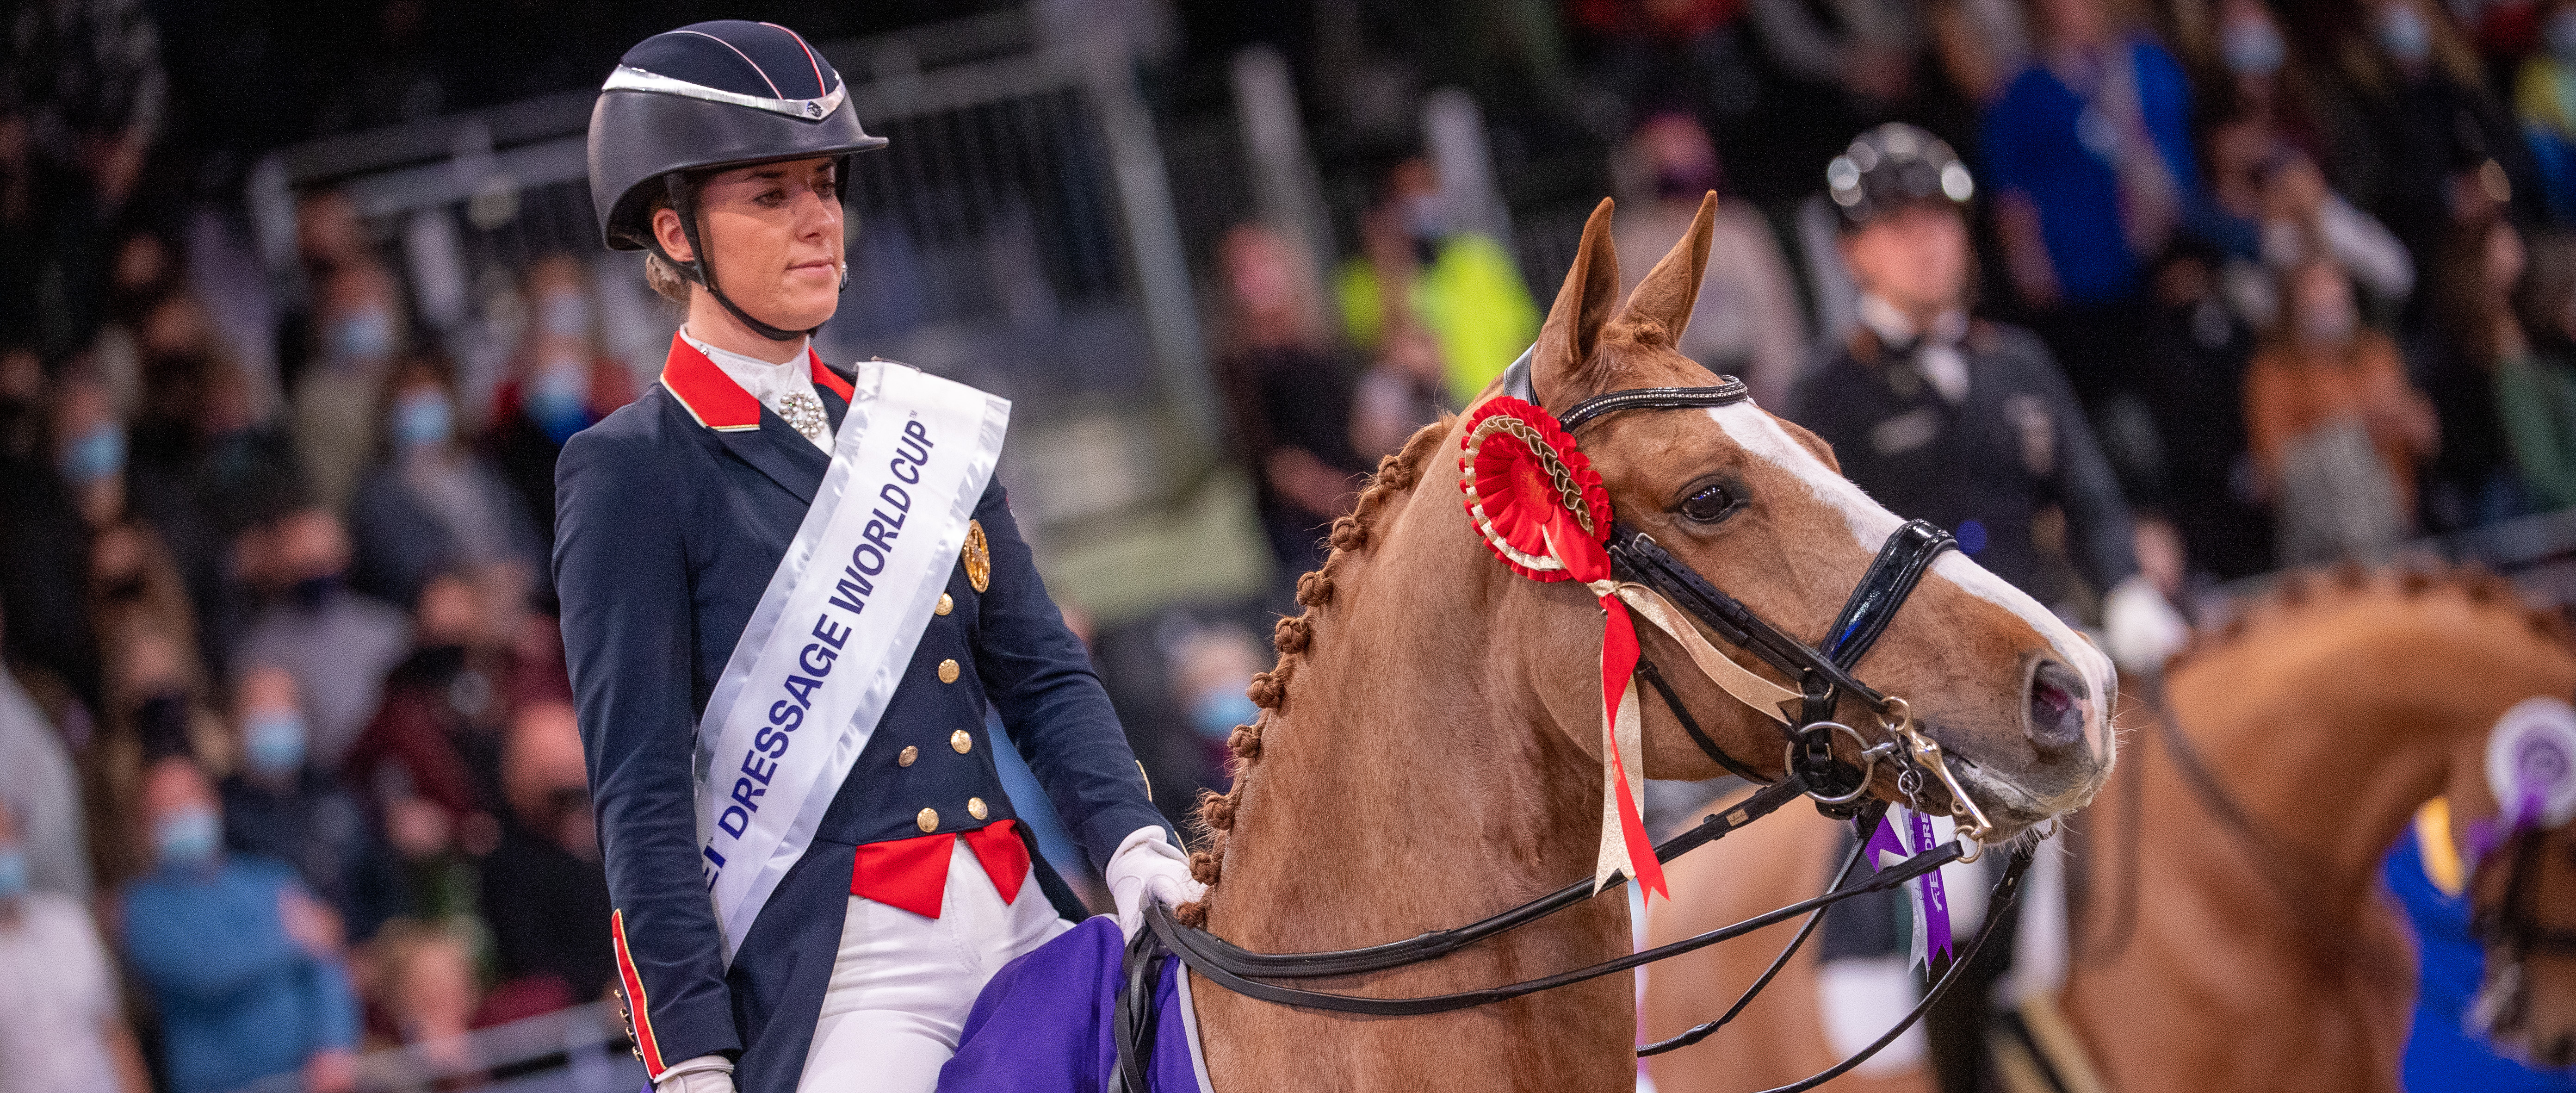 Charlotte Dujardin takes her fifth FEI Dressage World Cup qualifier in London with Gio